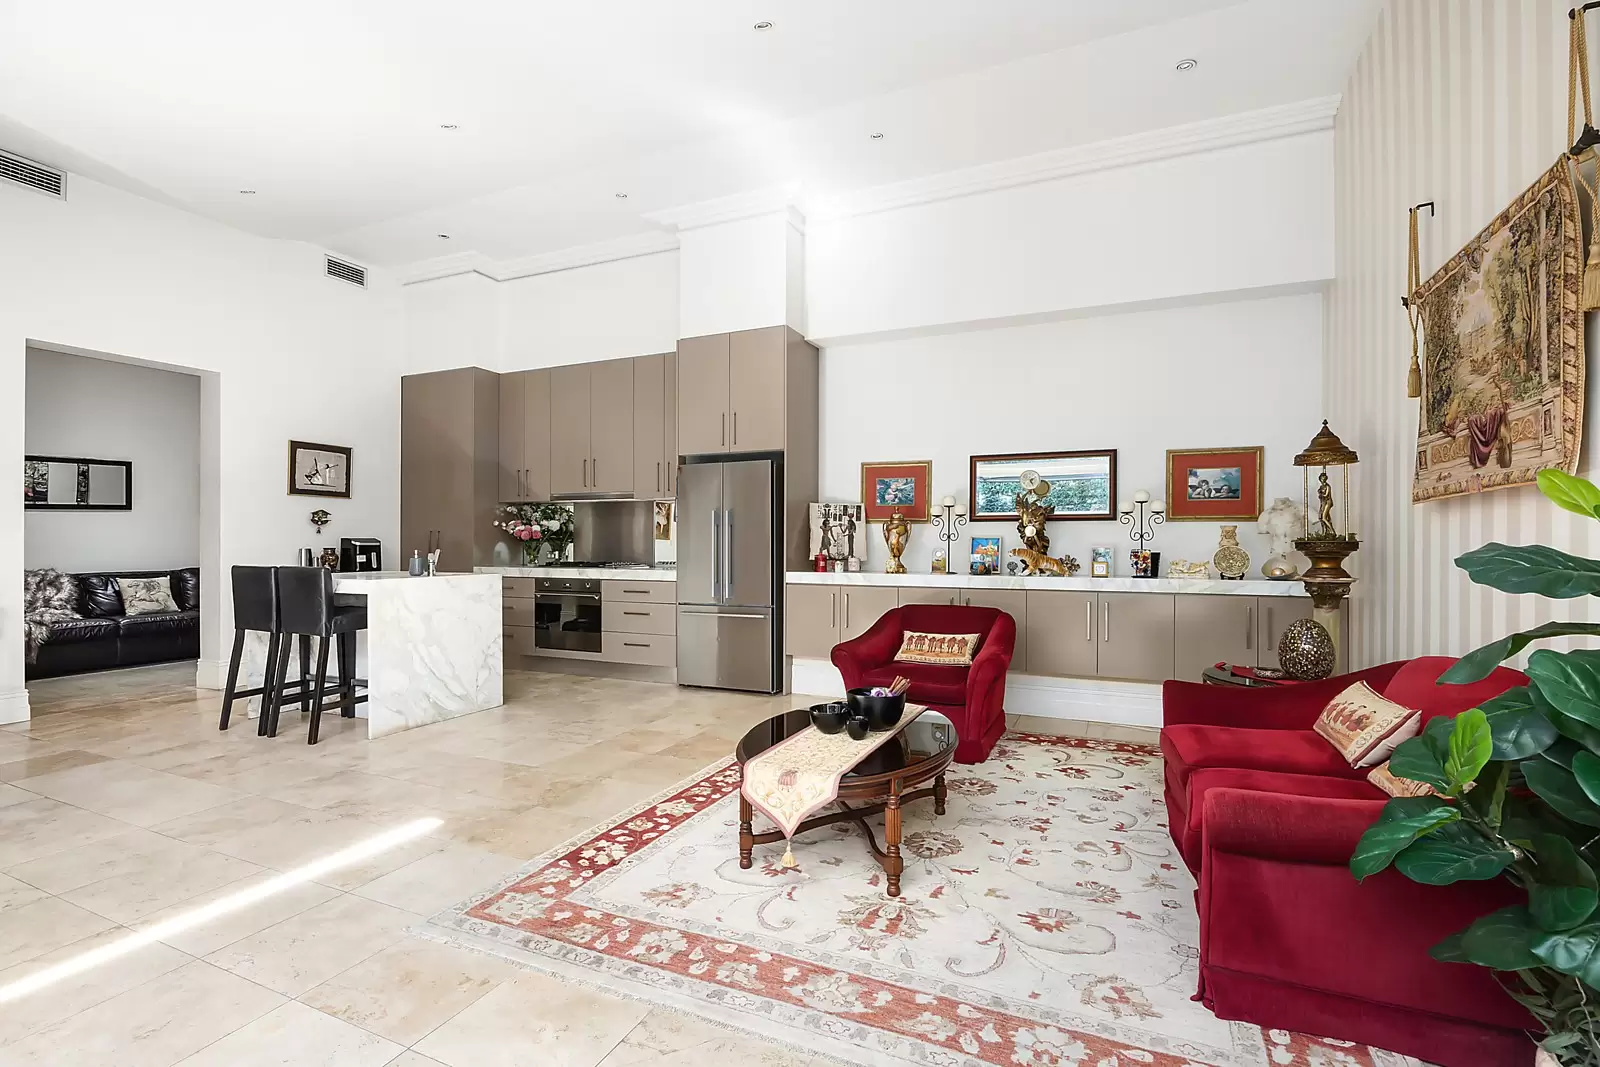 Photo #6: 300 Edgecliff Road, Woollahra - Sold by Sydney Sotheby's International Realty